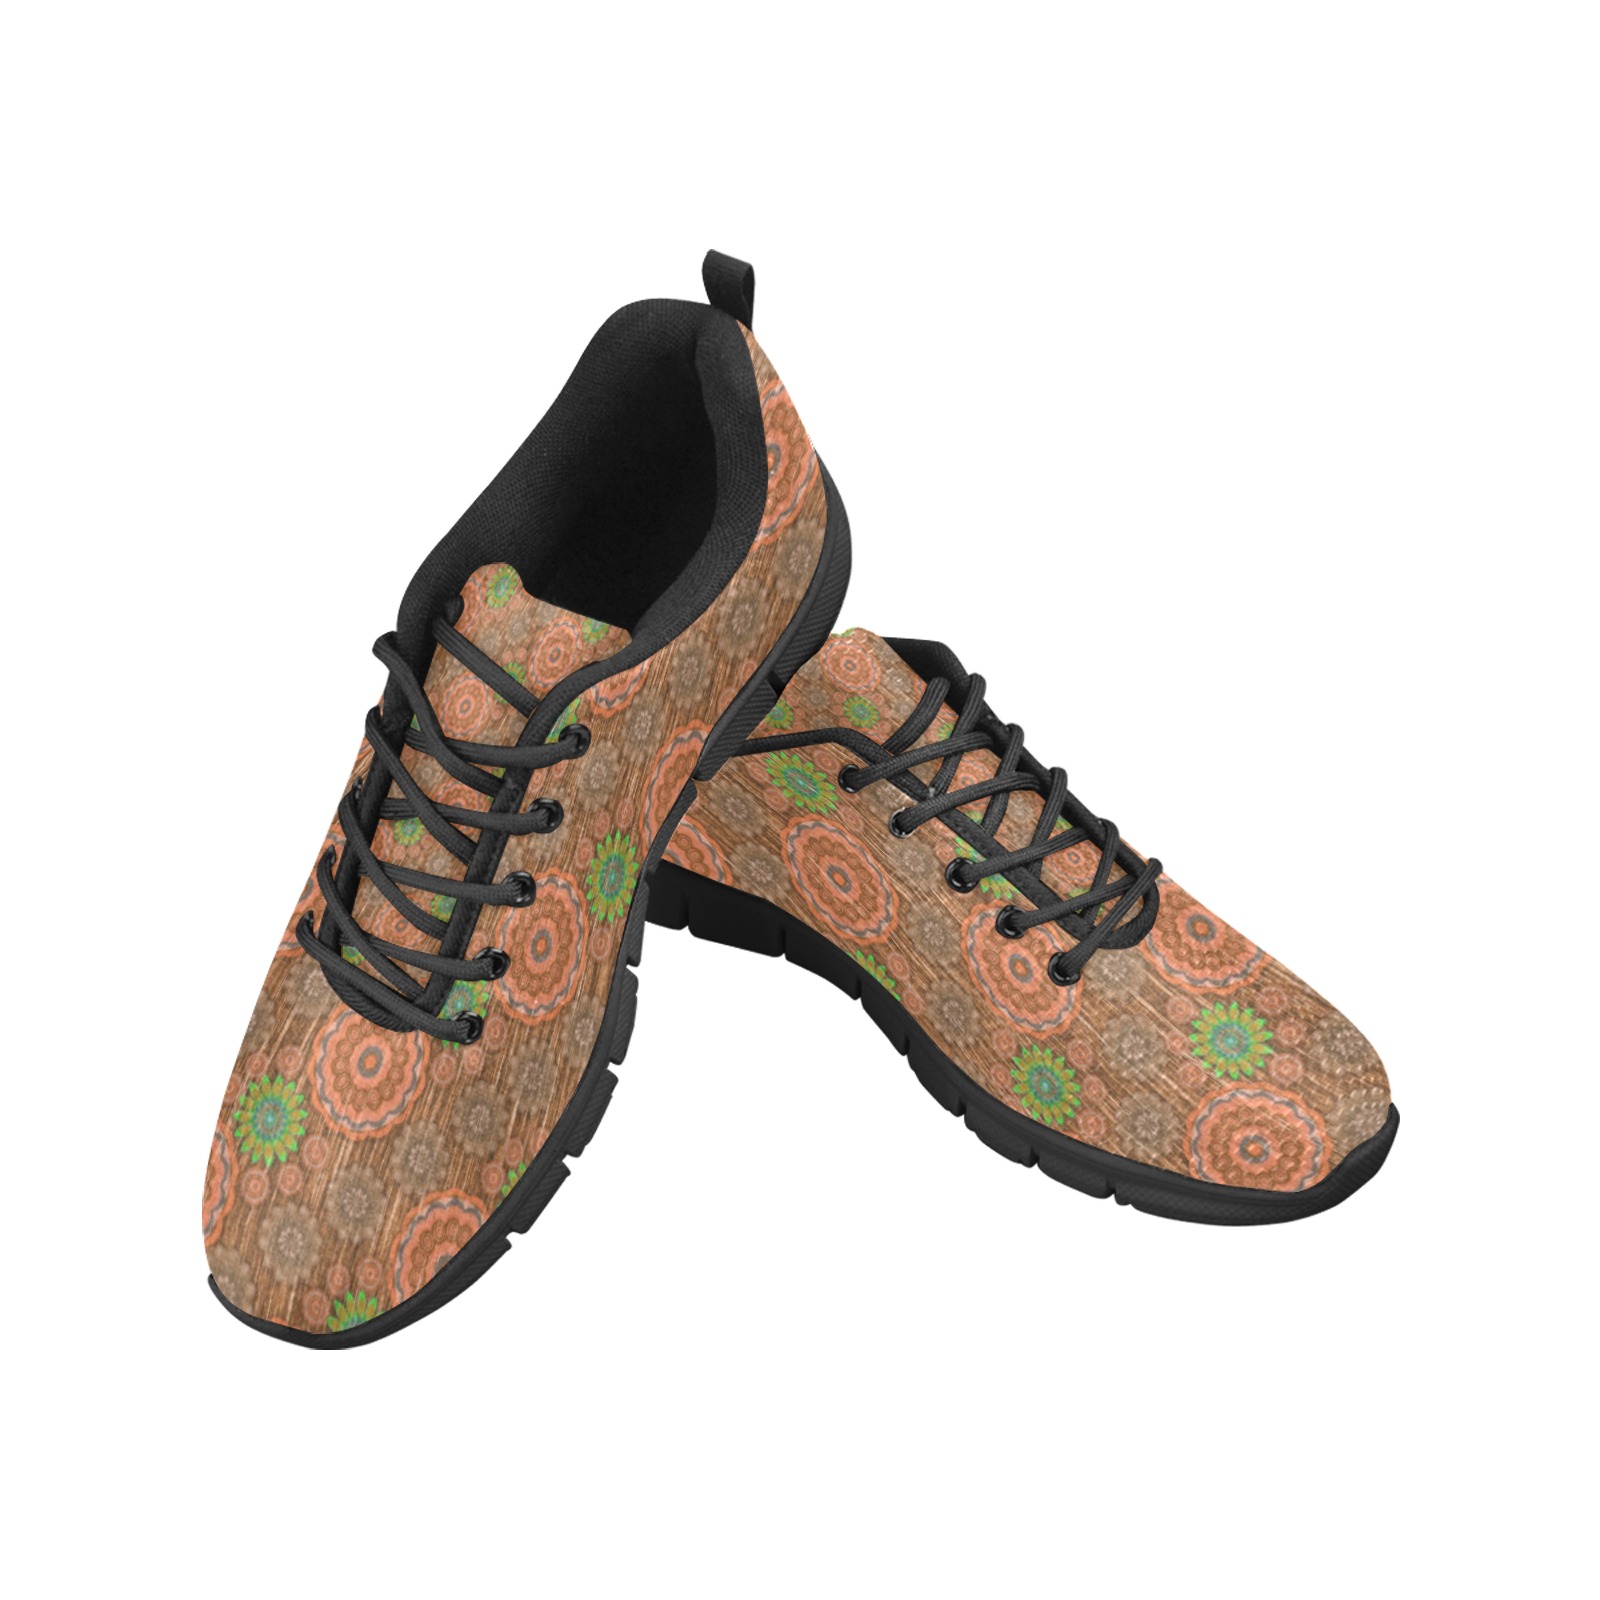 The Orange floral rainy scatter fibers textured Men's Breathable Running Shoes (Model 055)